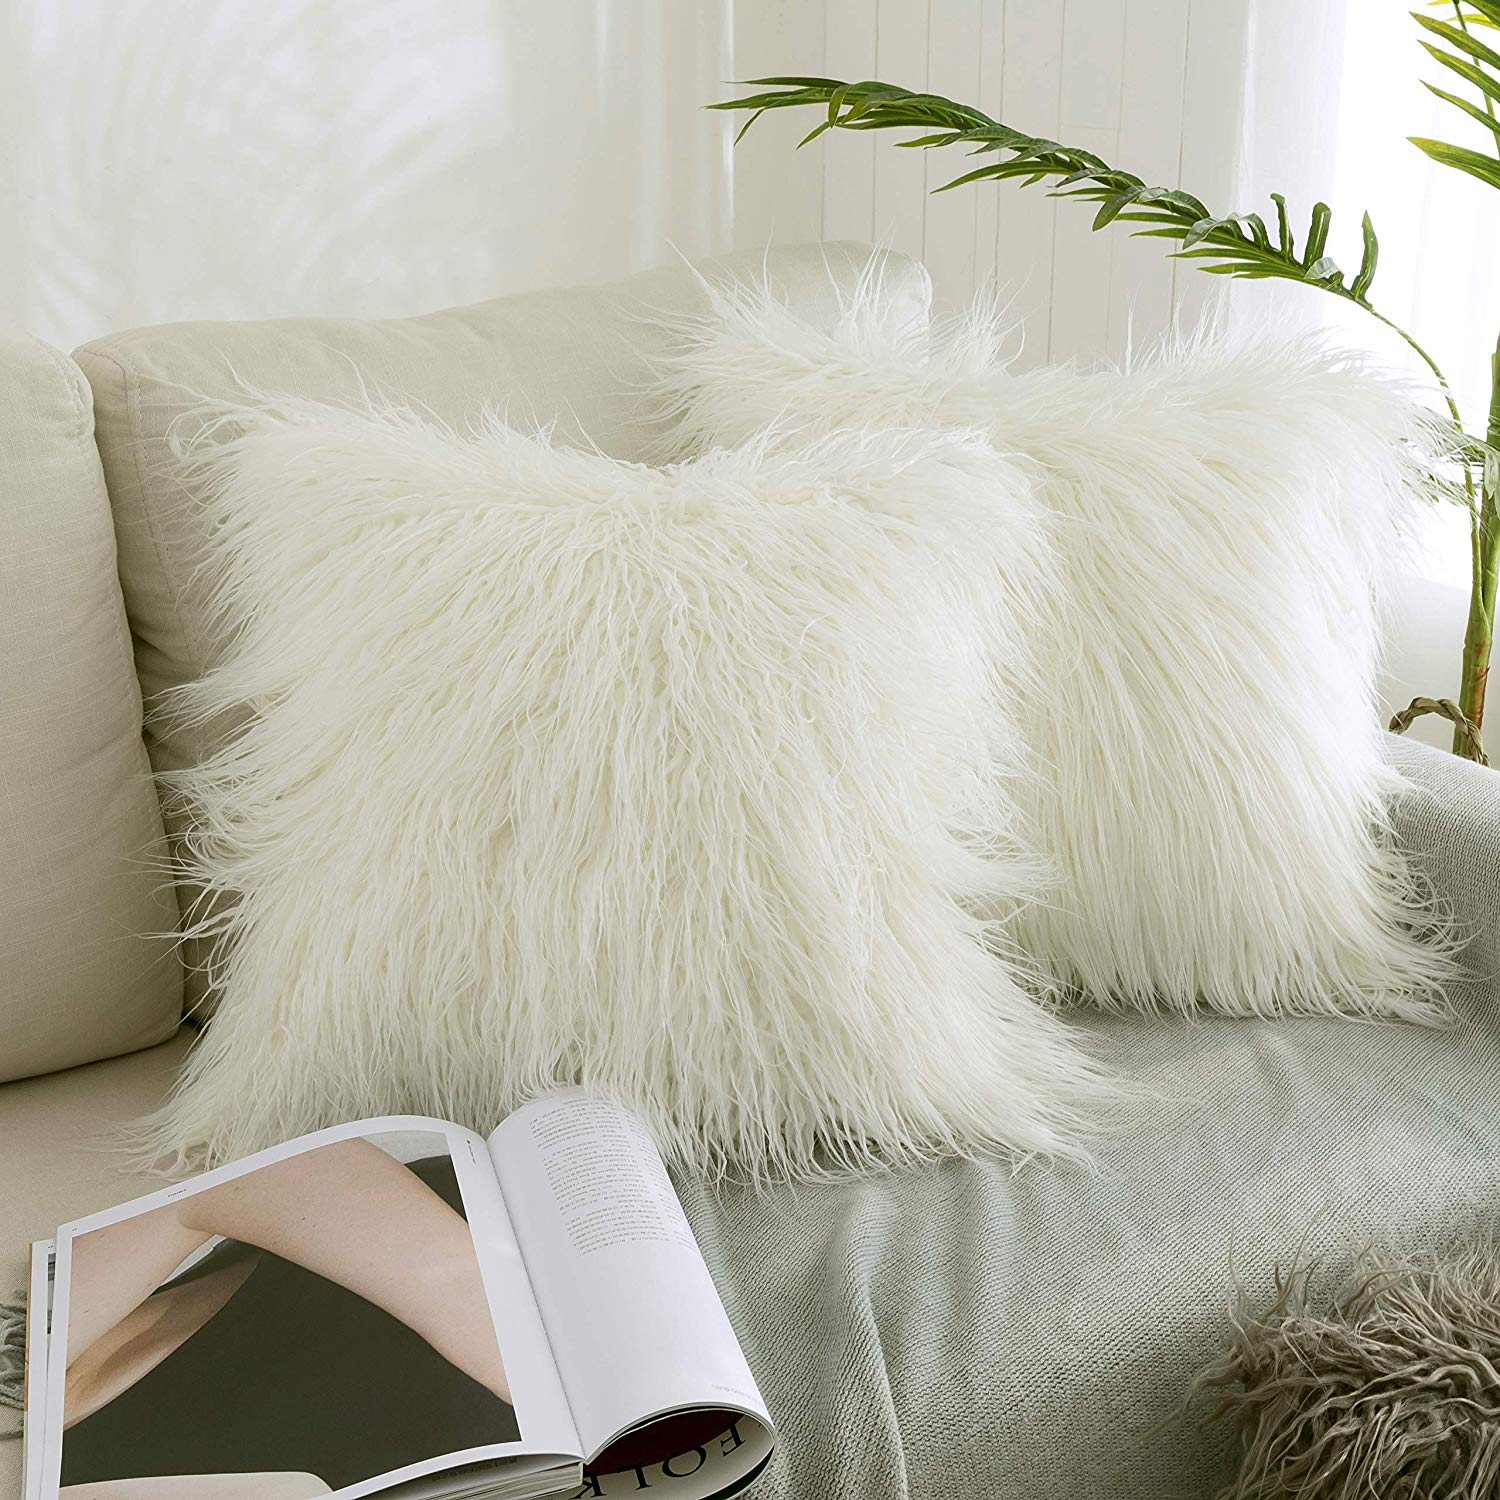 Kevin Textile Set of 2 Decorative New Luxury Series Merino Style Off-White Fur Throw Pillow Case Cushion Cover Pillow Covers for Bed (18" x 18" 45cm x 45cm)